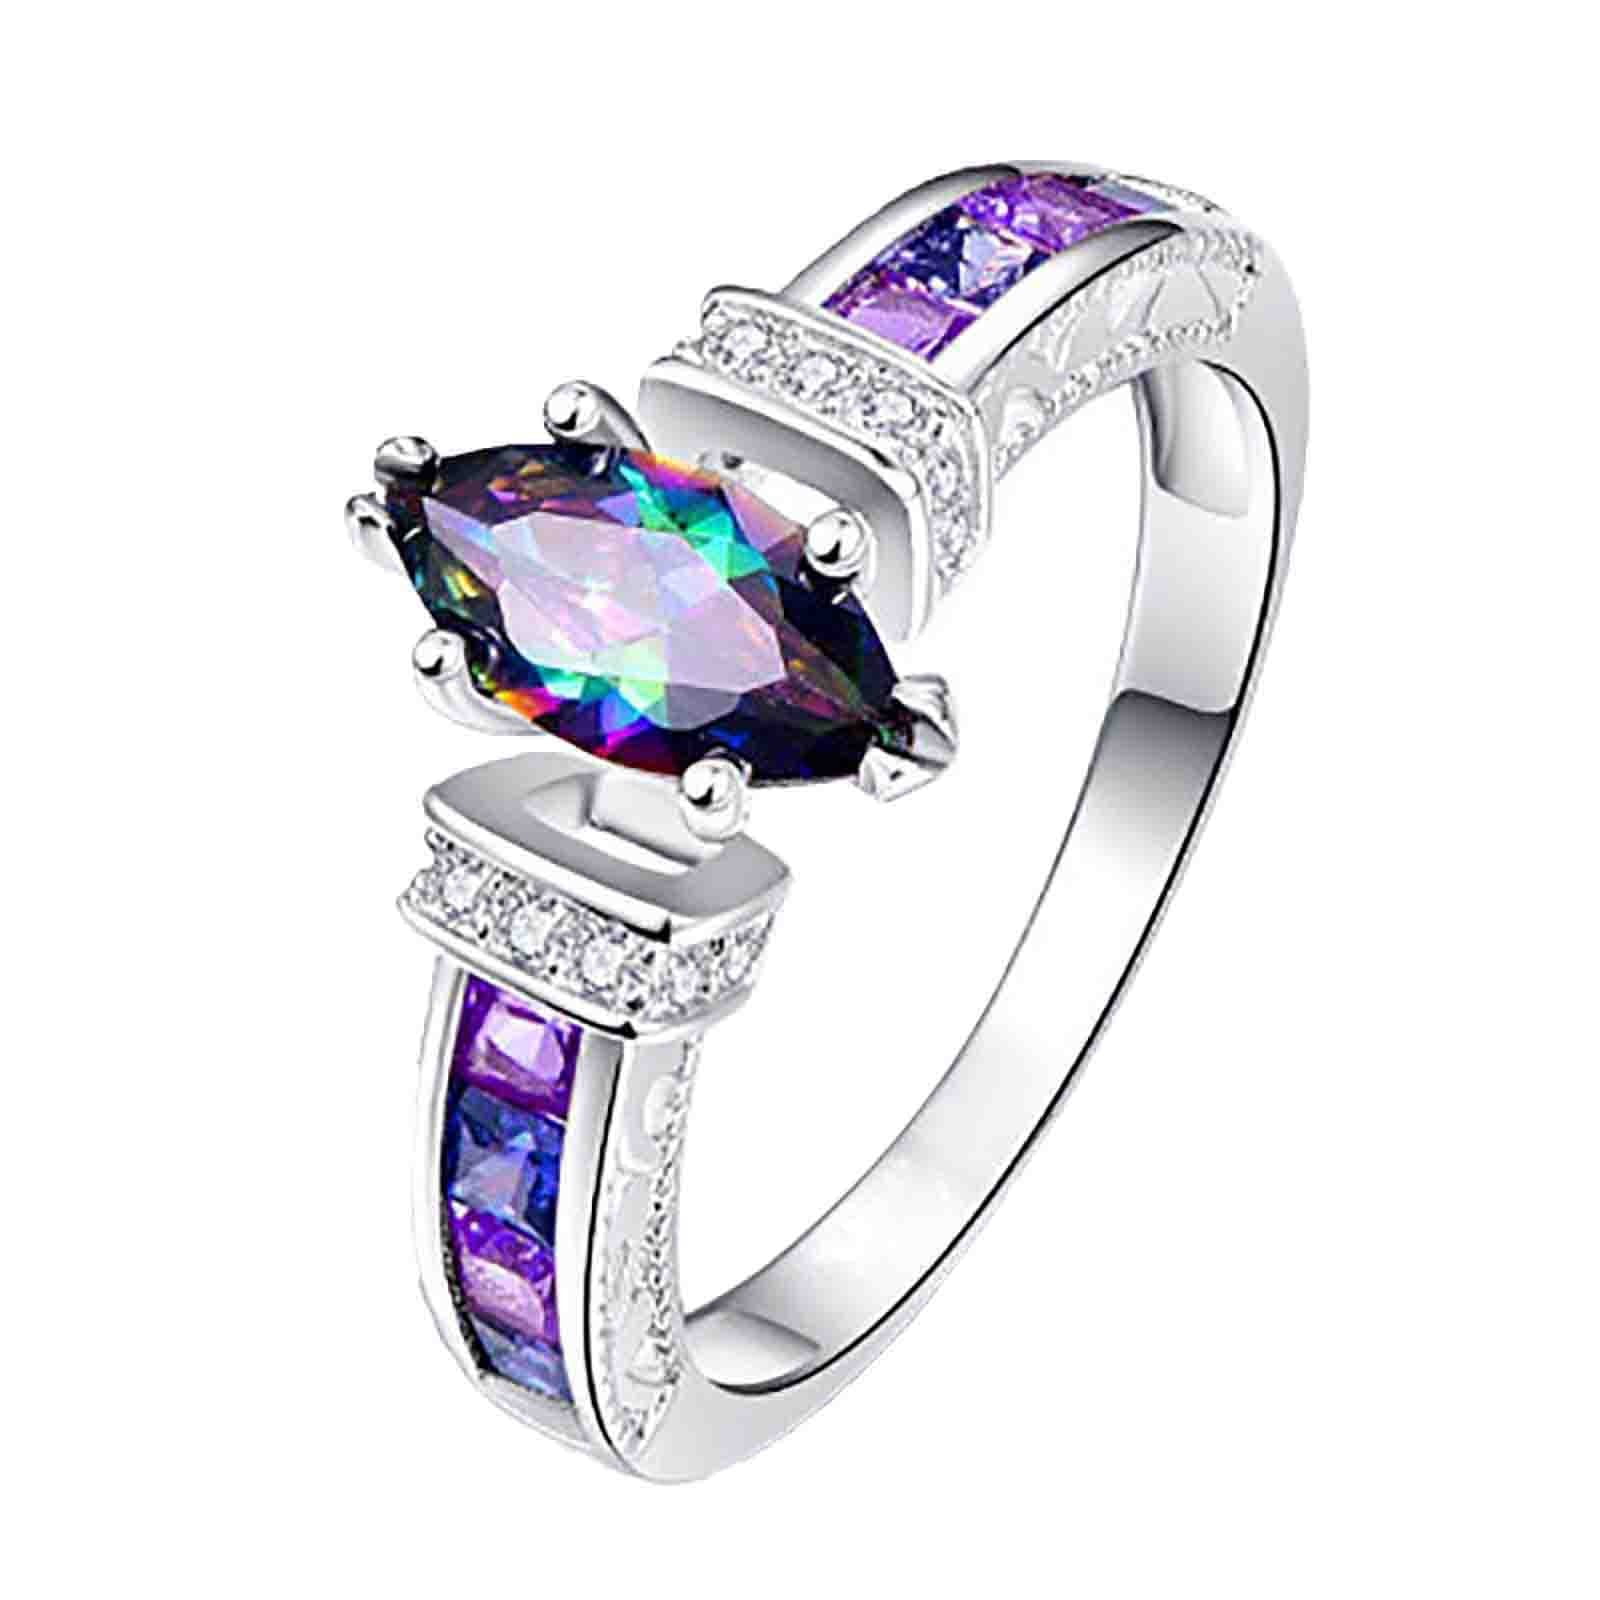 Princess Kylie Pave Set Synthetic Tanzanite Clear Cubic Zirconia Oval Center Ring Sterling Silver Size 5 